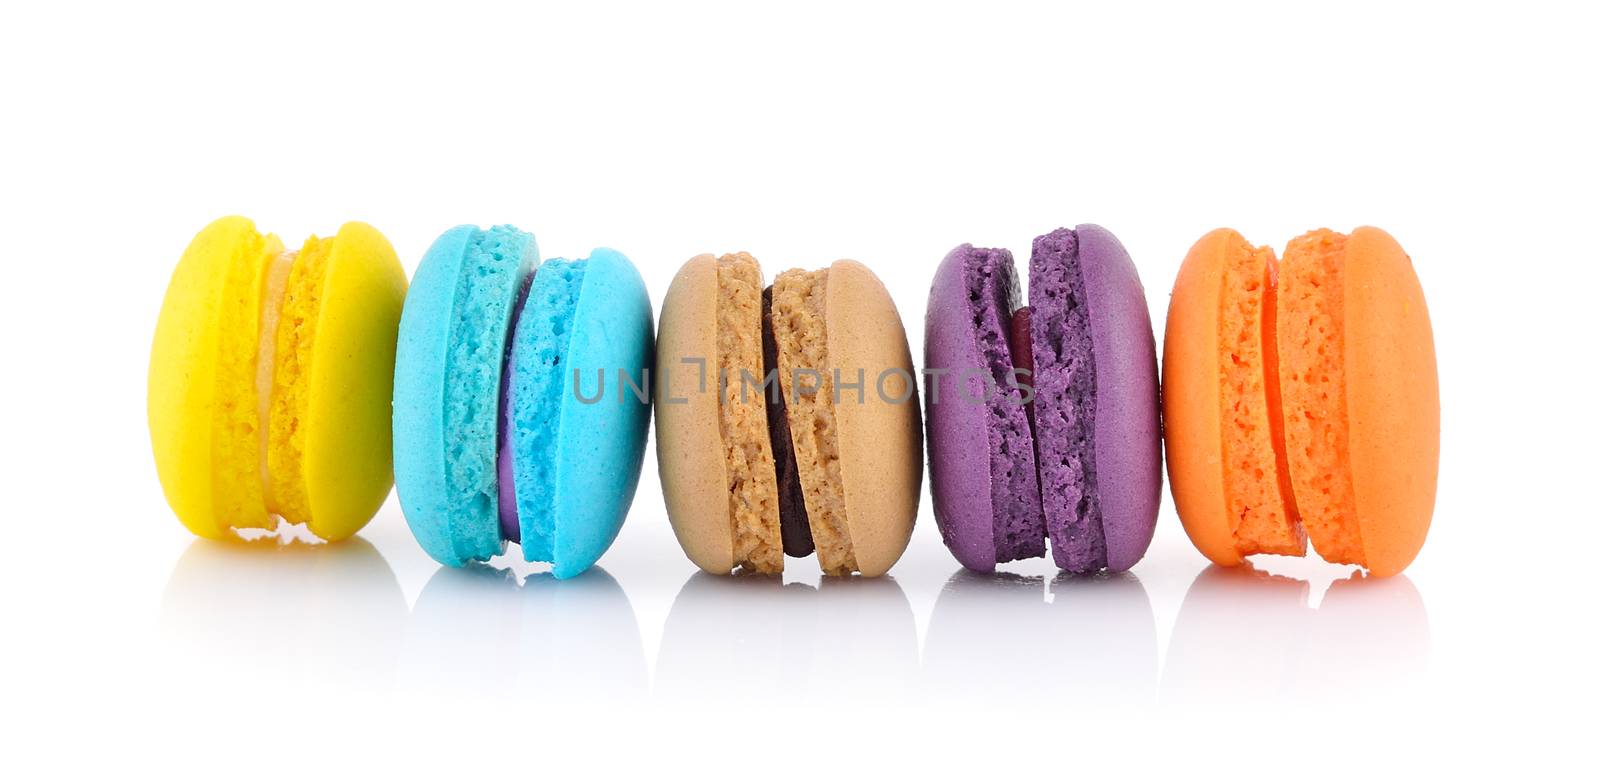 colourful french macaroons or macaron on white background by sommai